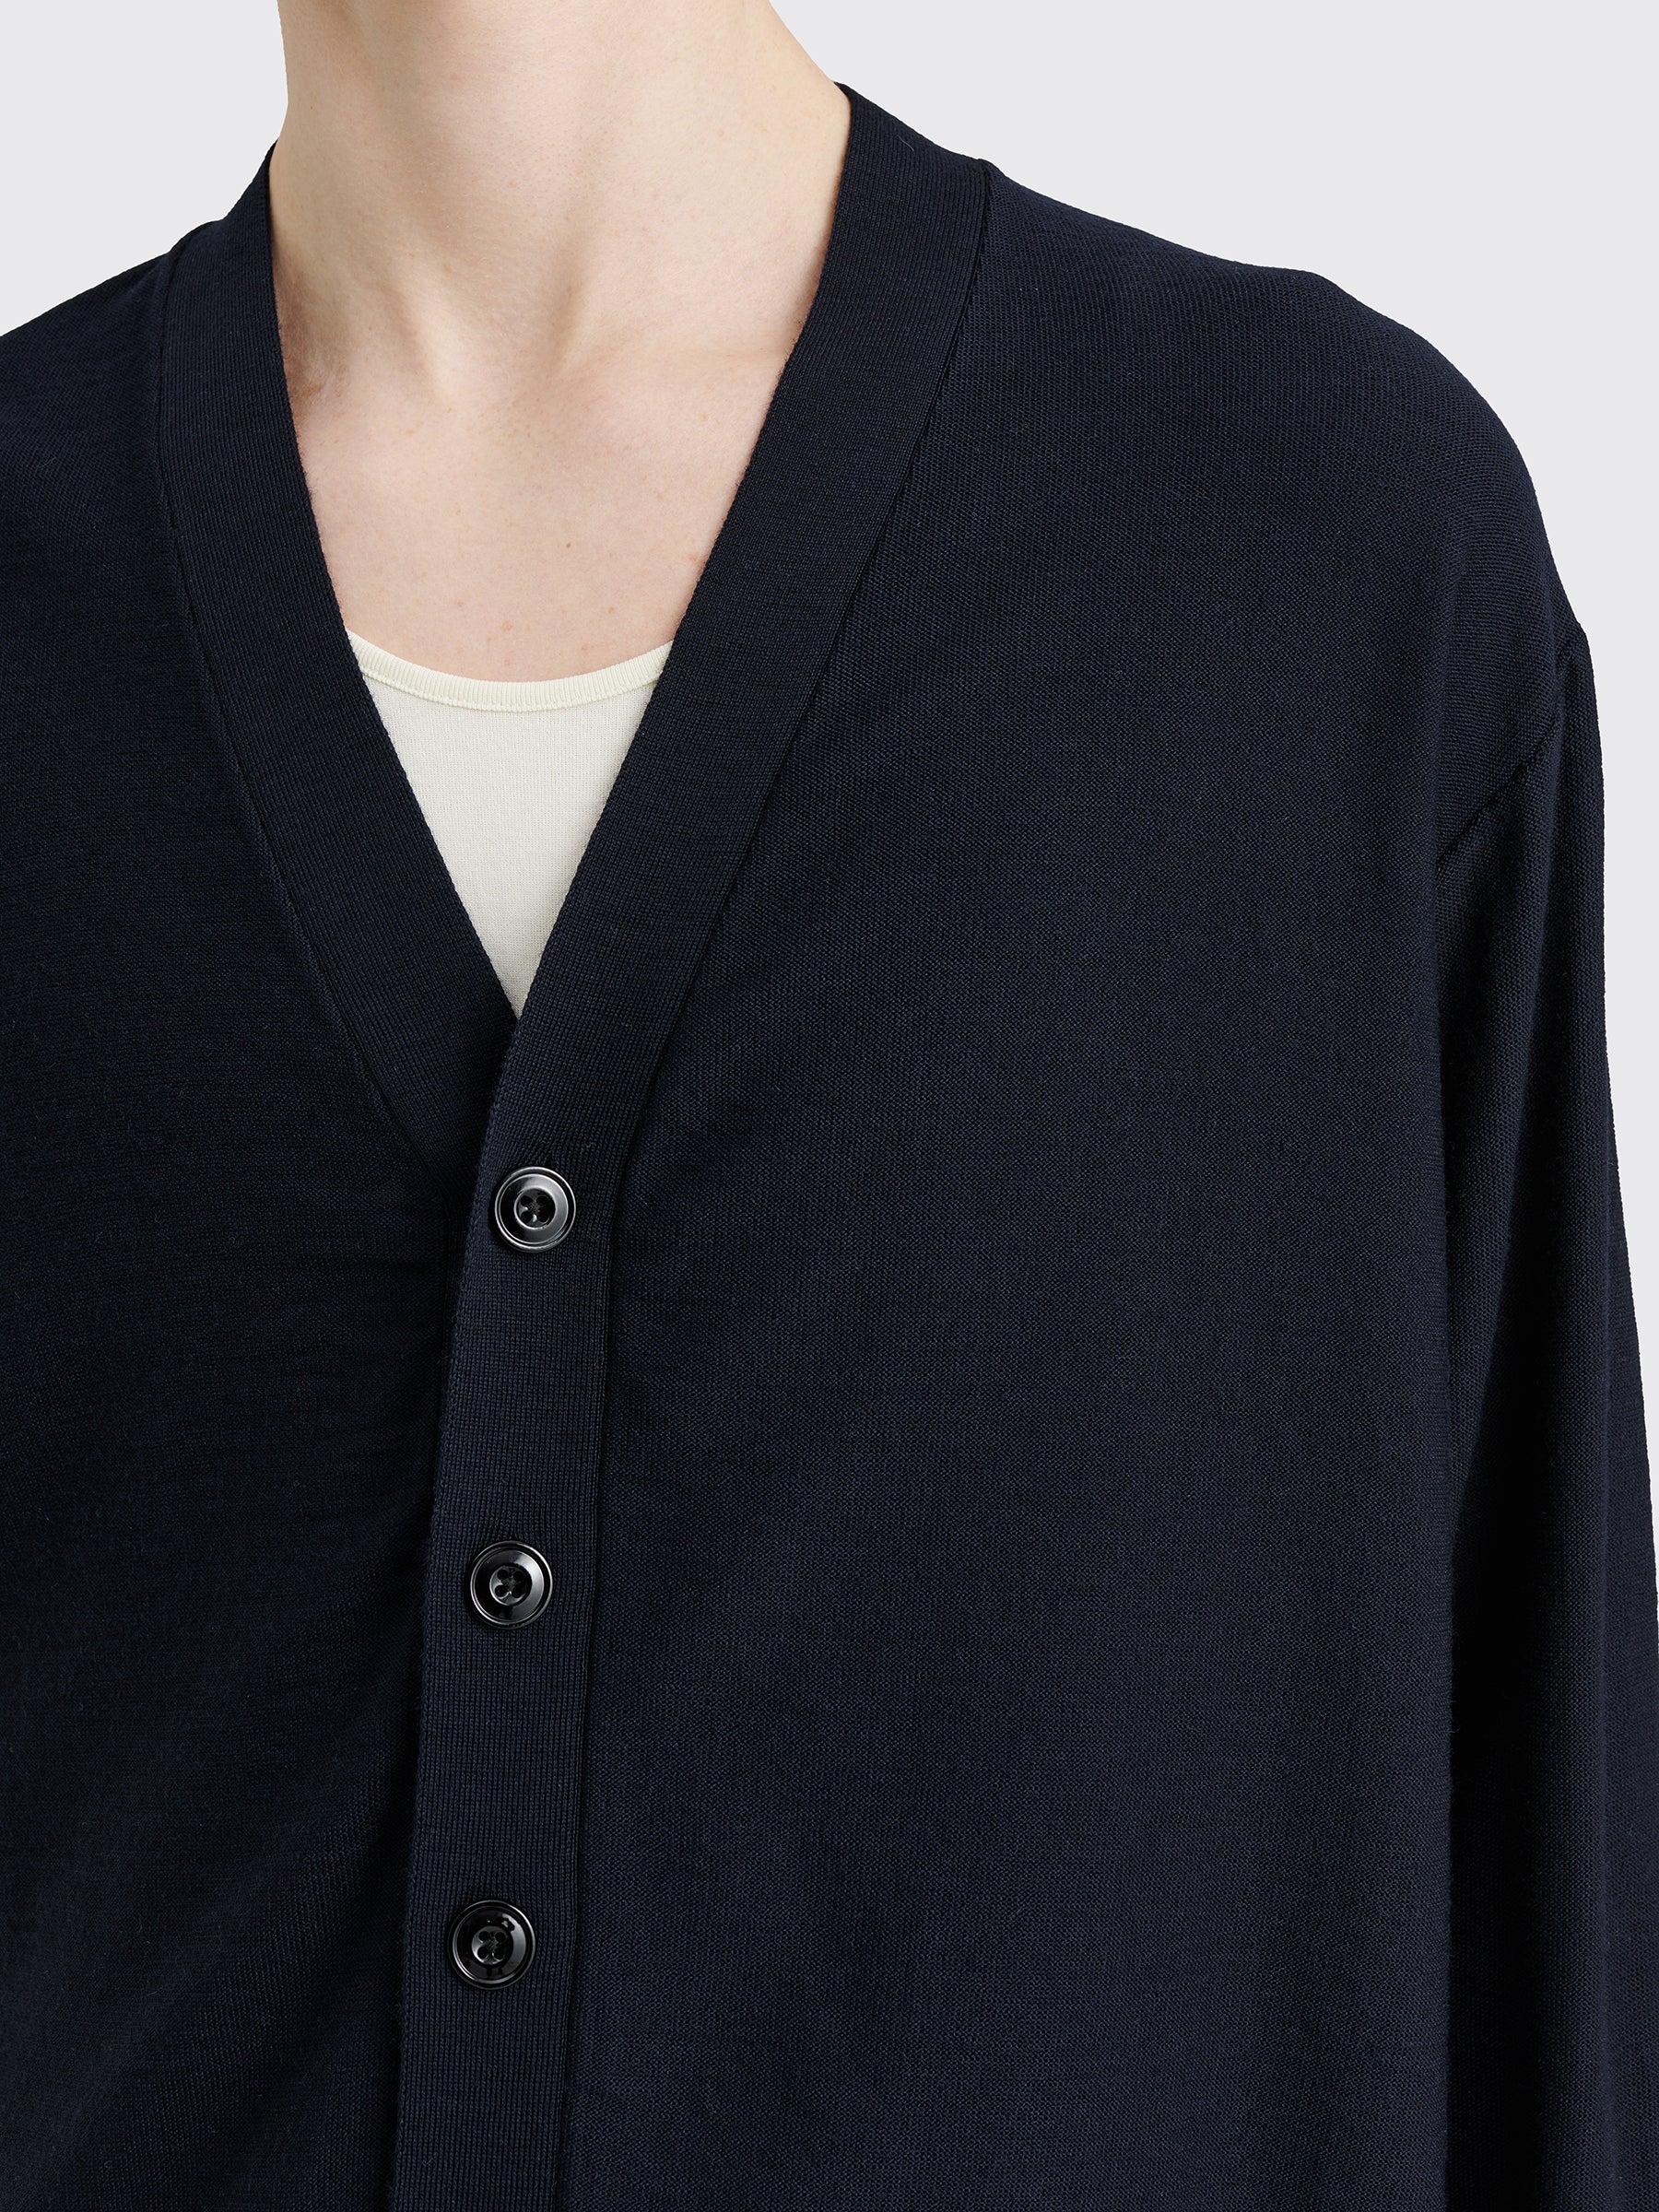 Lemaire Relaxed Twisted Cardigan Dark Navy